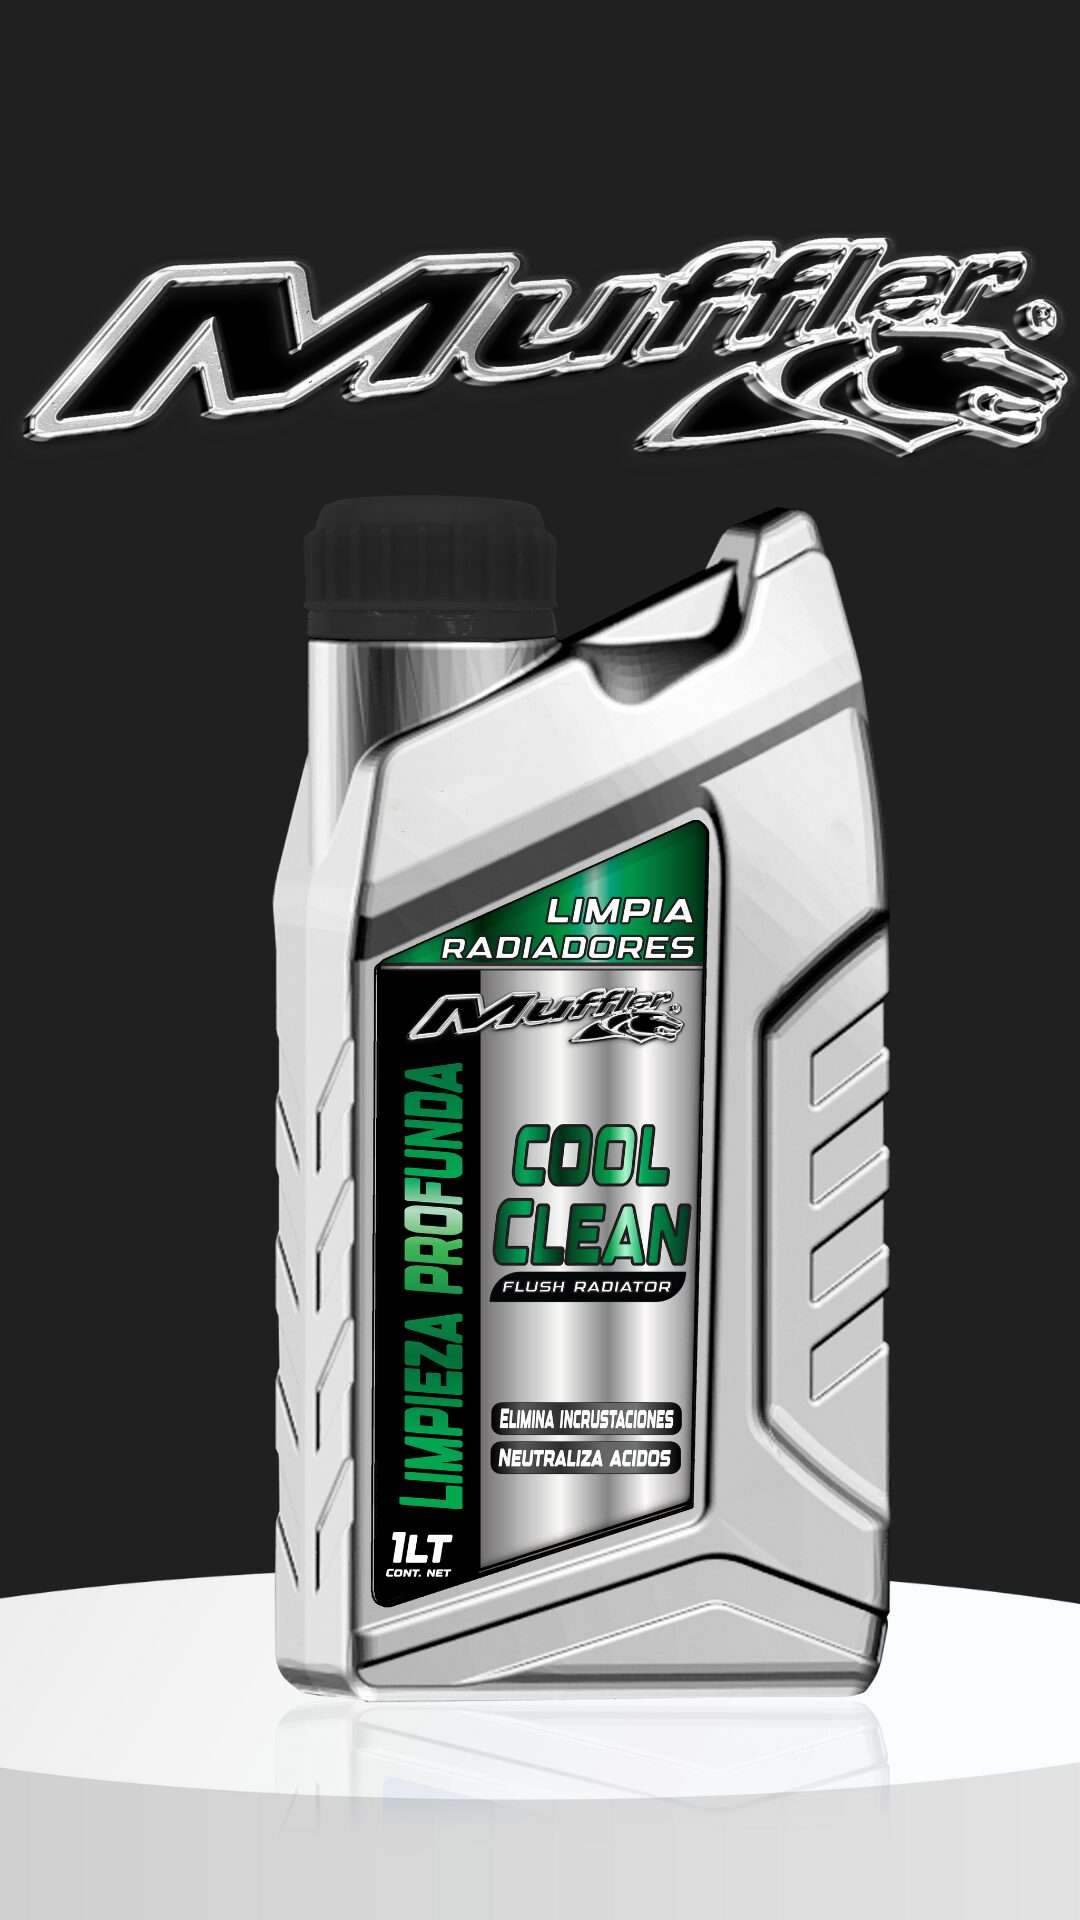 Producto Cool Clean. Muffler